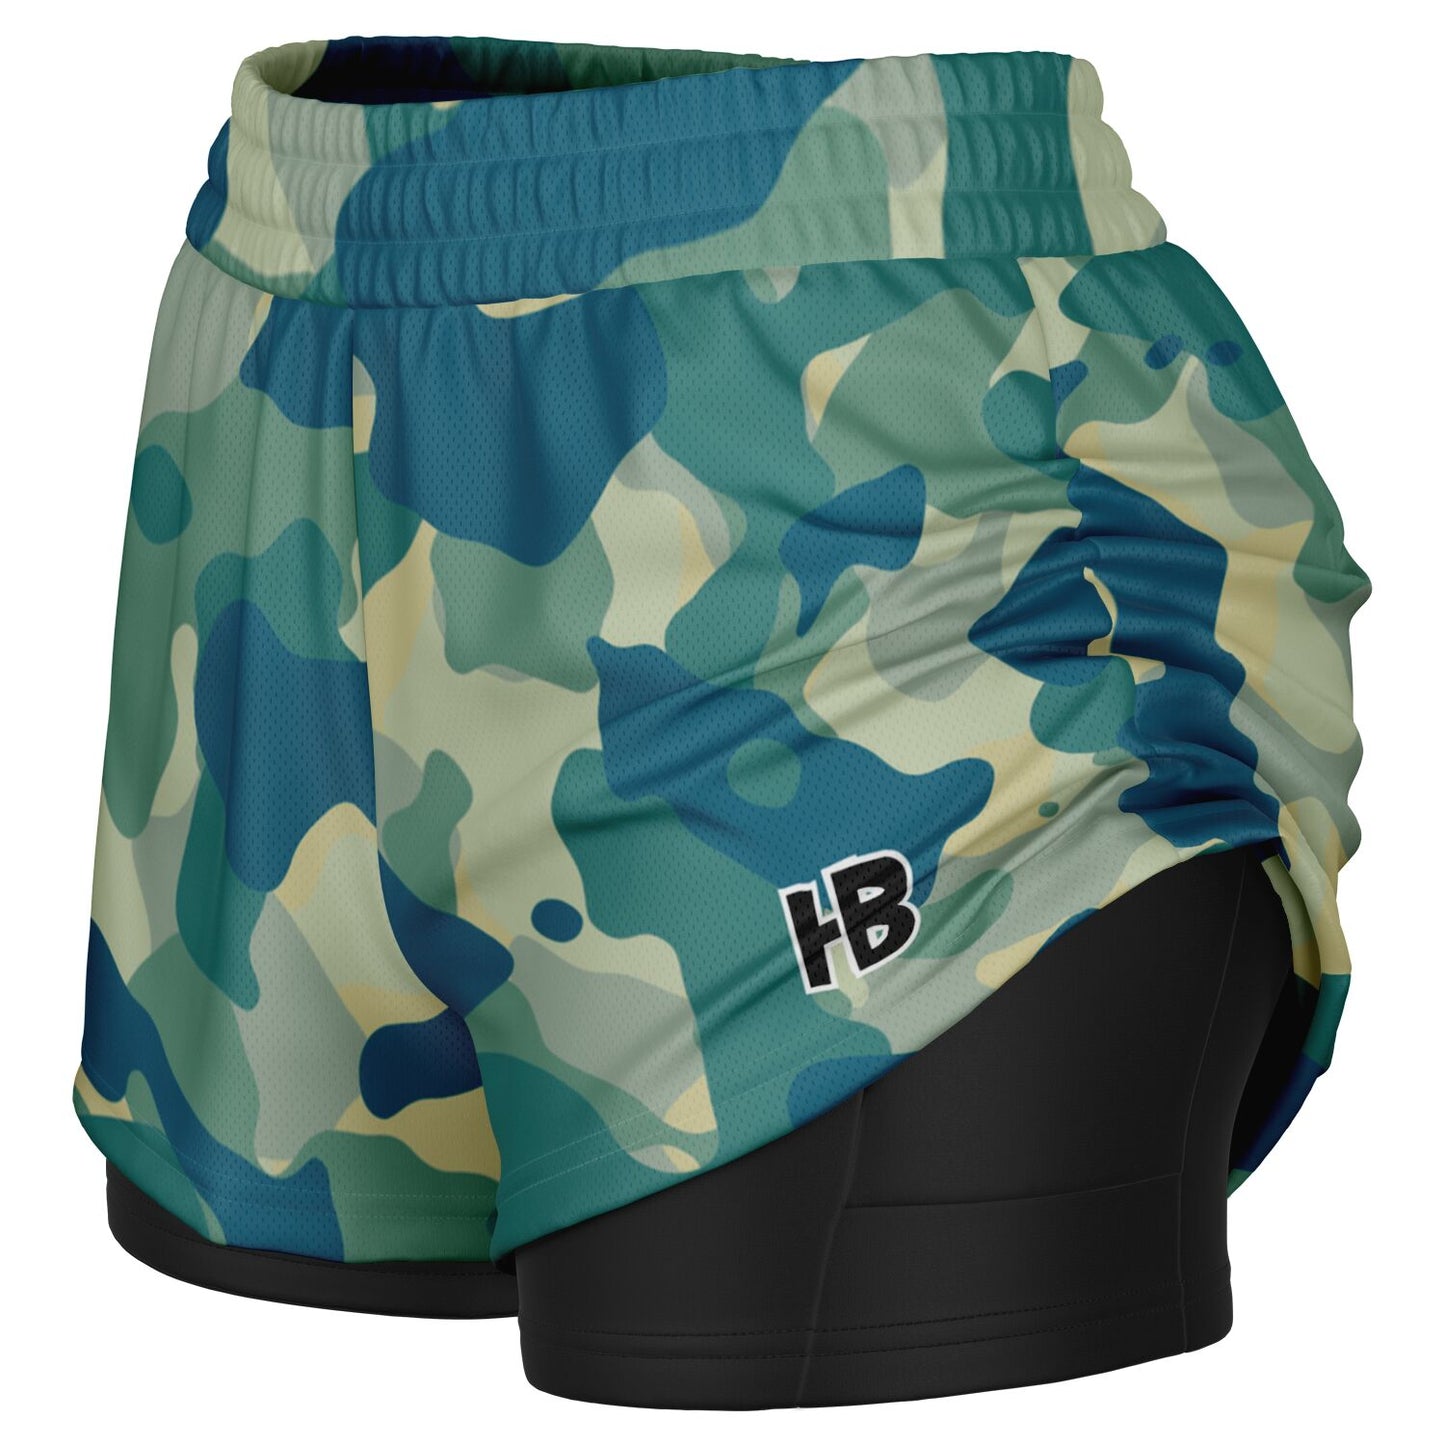 WhErE ThOu Go CaMo WoMeN's AnD mEnS 2 iN 1 sHoRtS